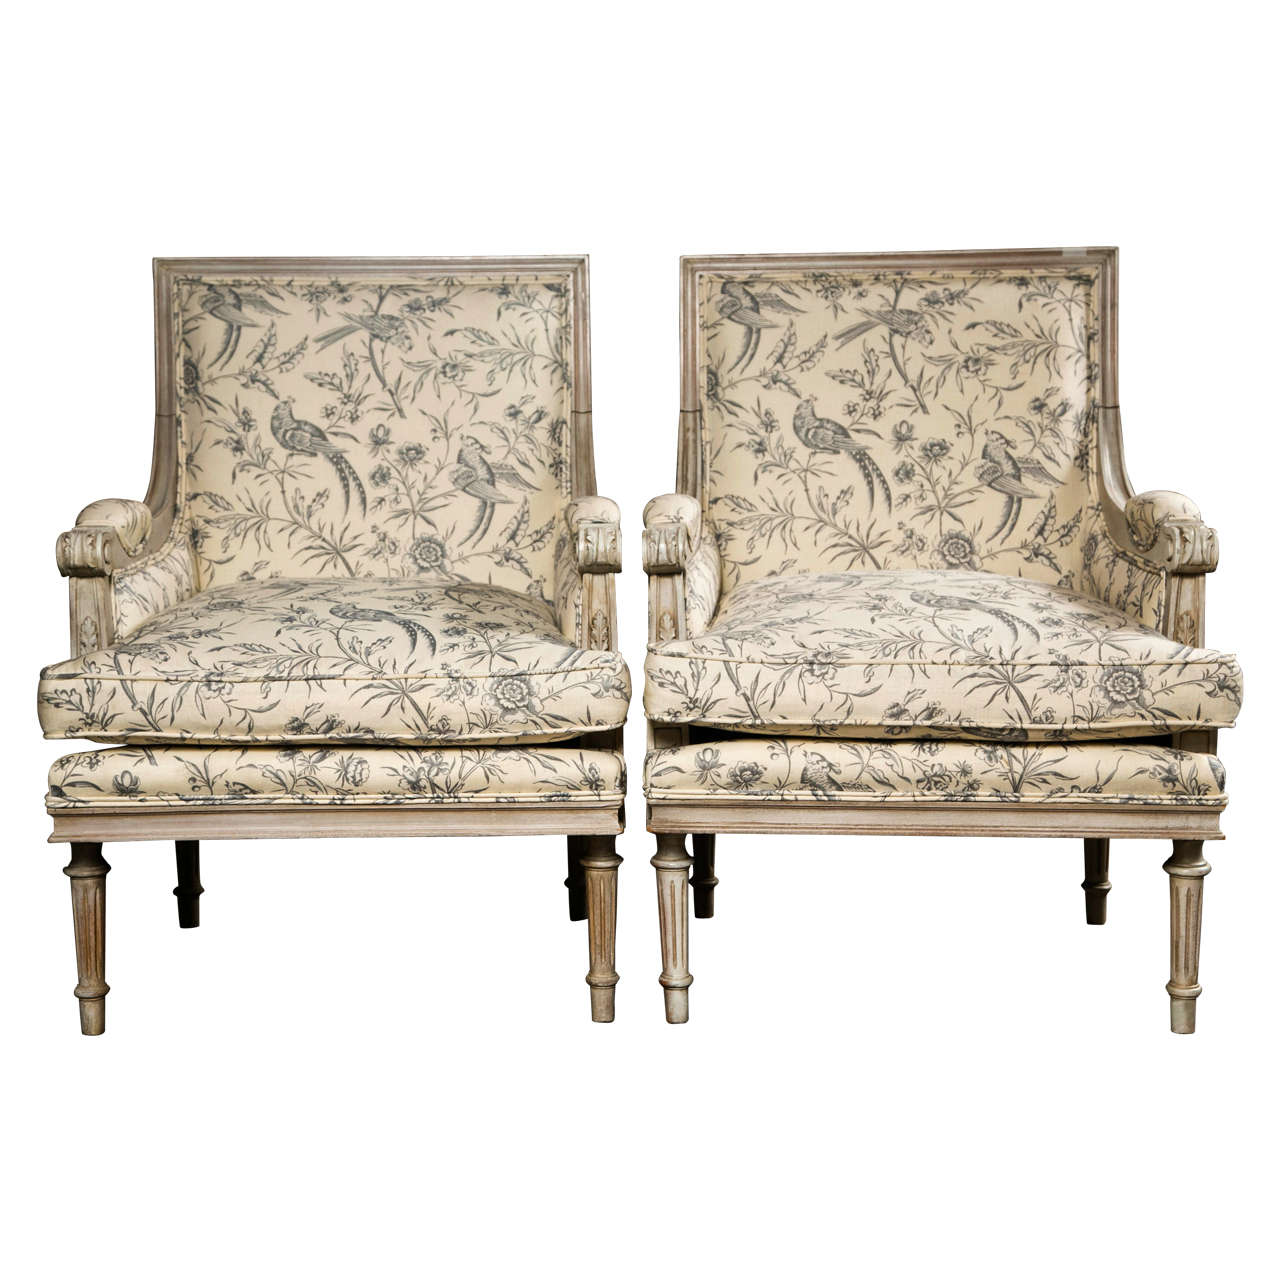 Pair of Painted Bergere Chairs by Jansen